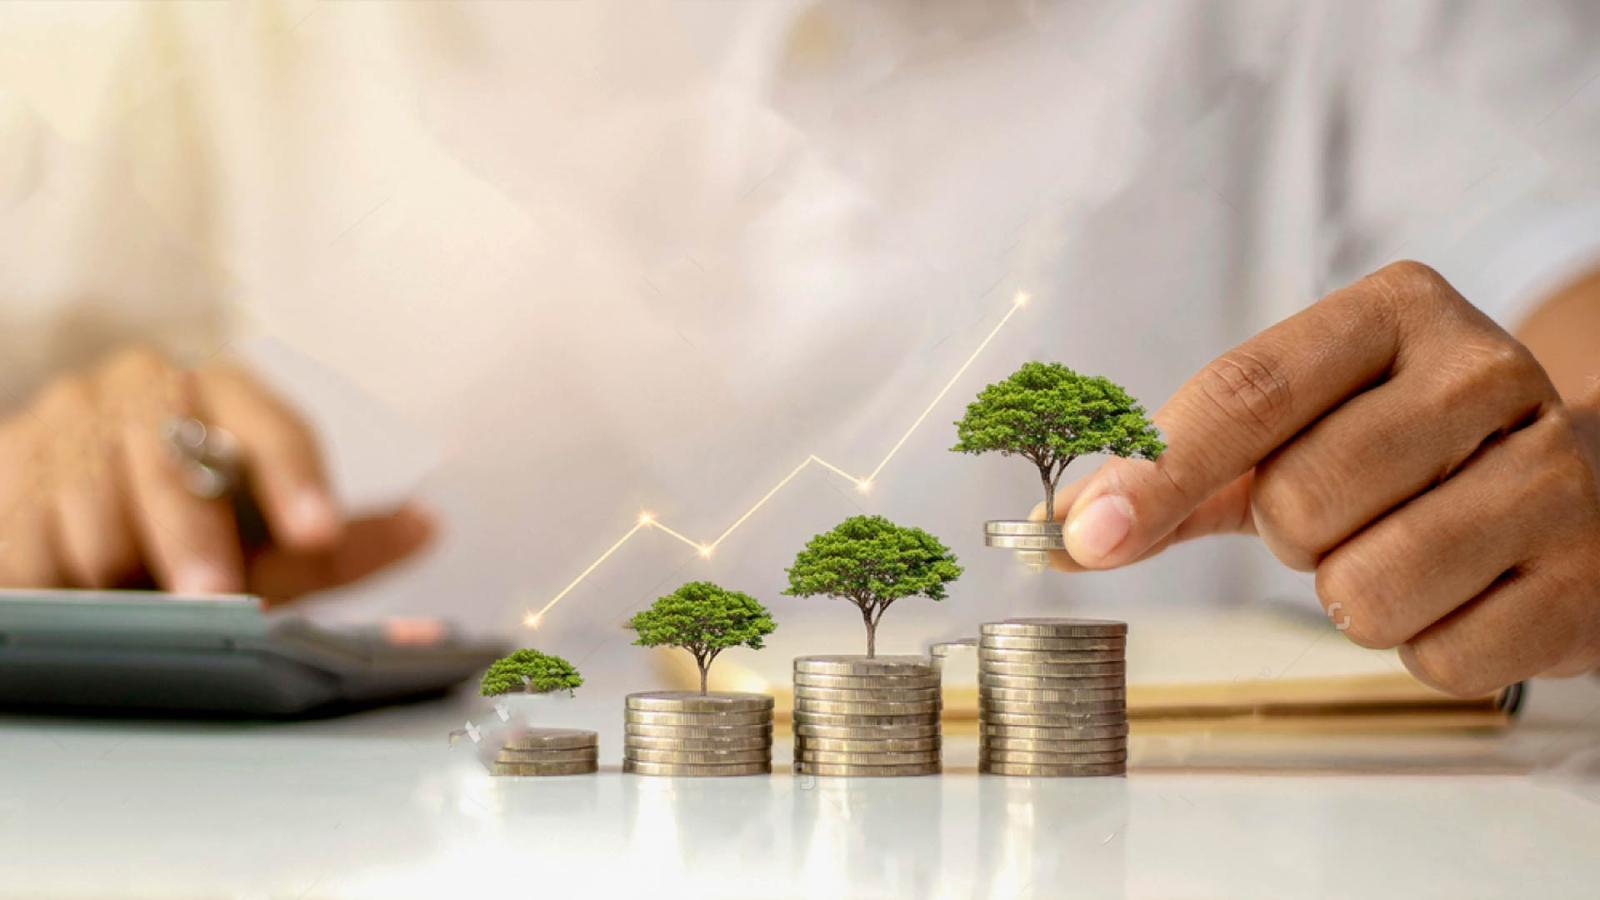 stock-photo-a-businessman-holding-a-coin-with-a-tree-that-grows-and-a-tree-that-grows-on-a-pile-of-money-the-1879675894.jpg